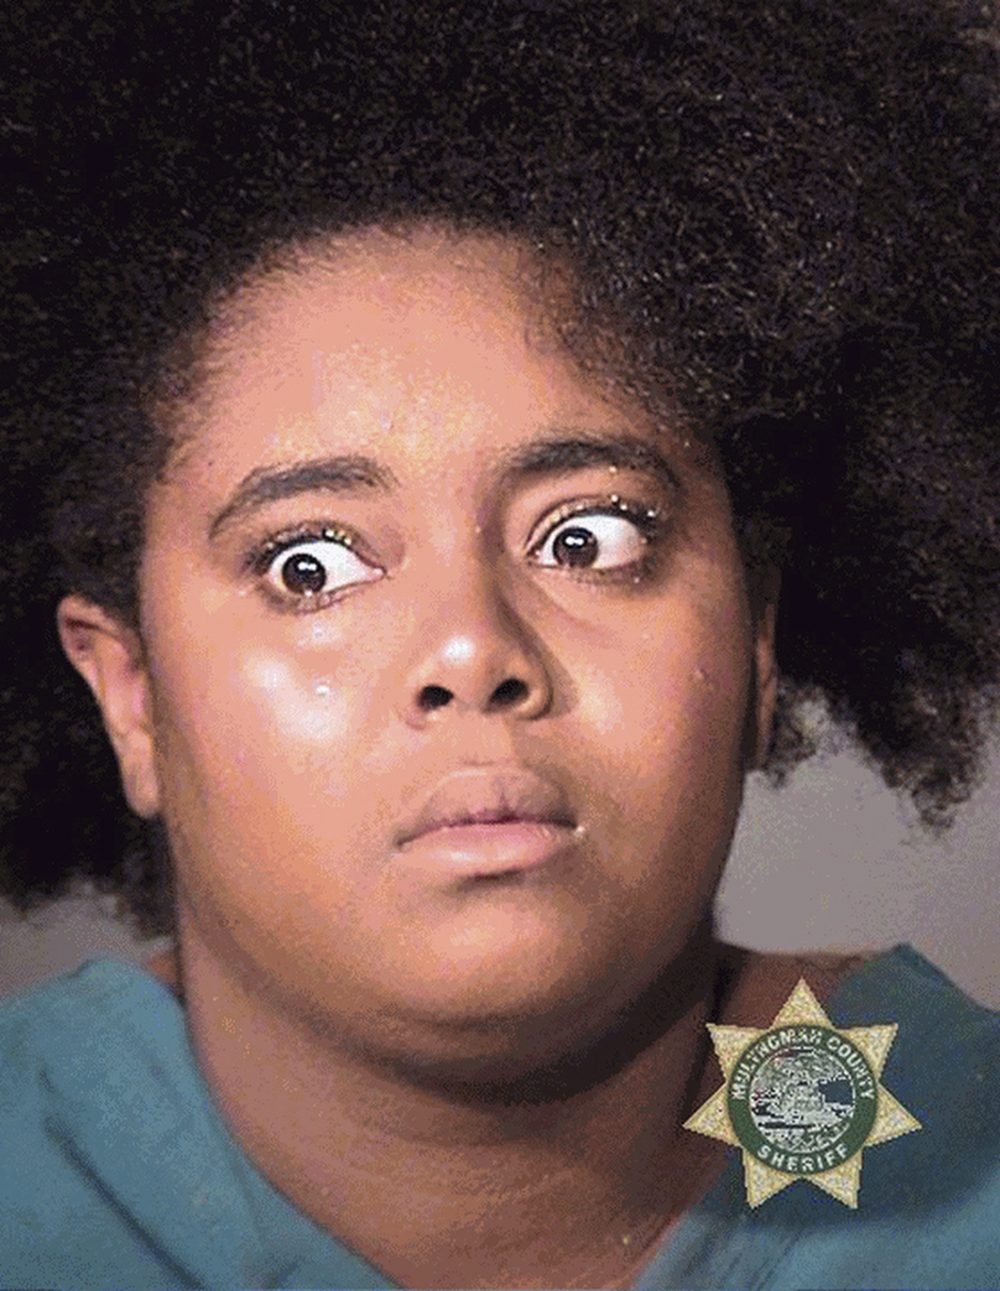 This undated booking photo provided by Multnomah County Sheriff shows Jasmine Renee Campbell.